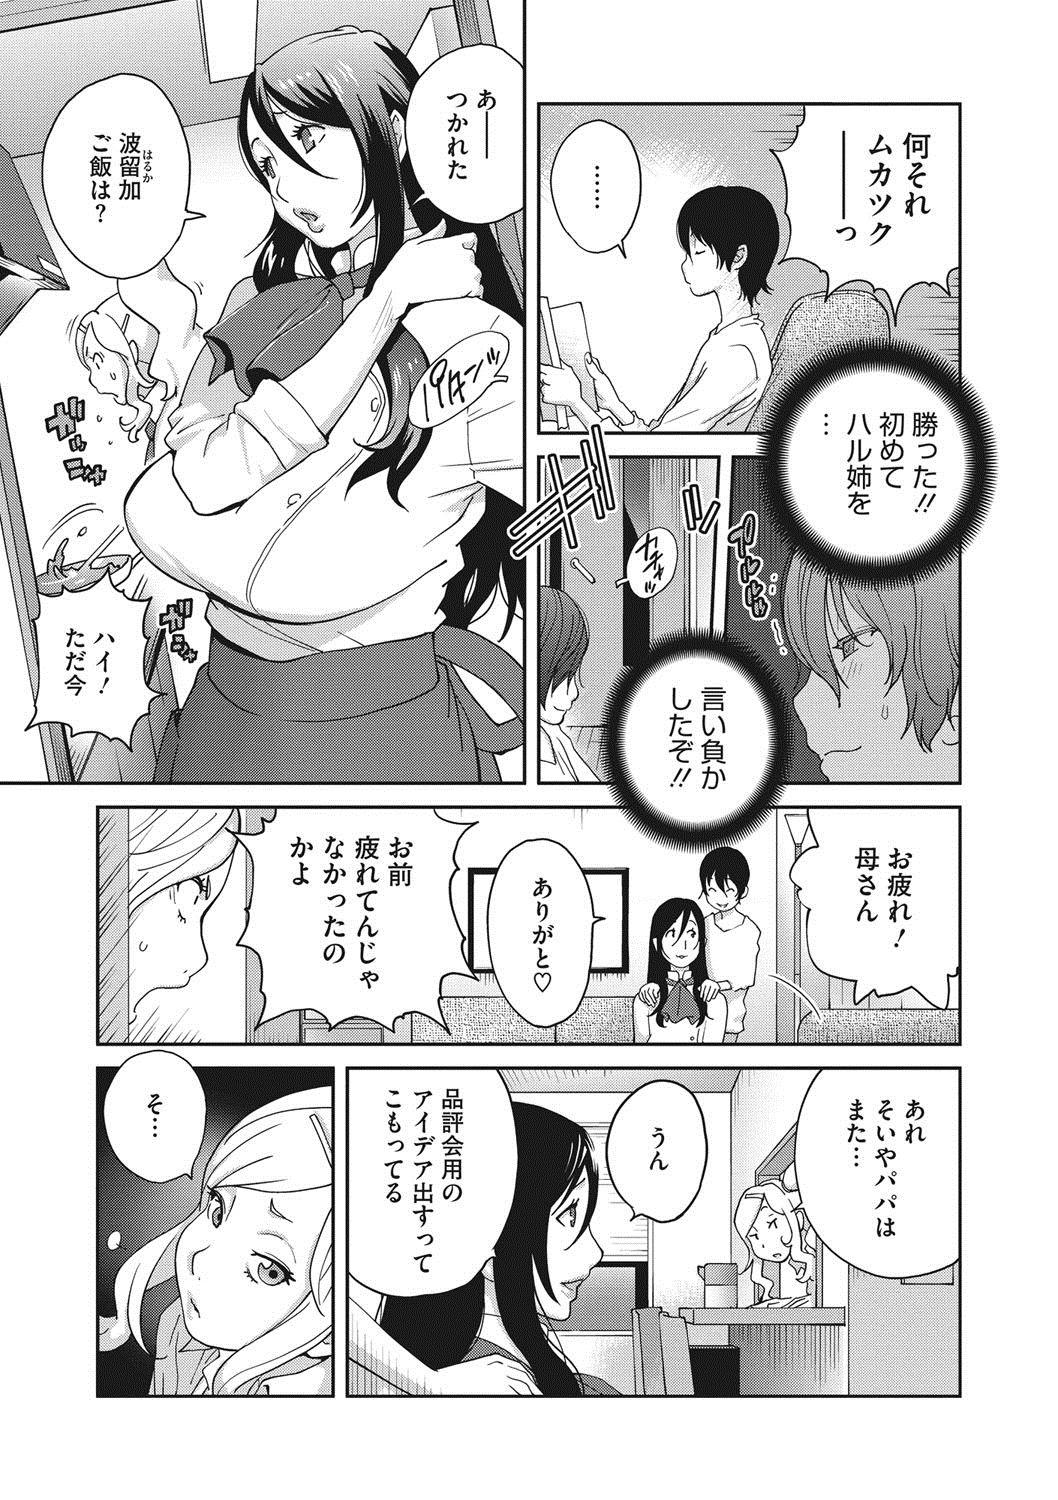 [Kotoyoshi Yumisuke] Haha to Ane to Aoi Ichigo no Fromage - Fromage of mother and an older sister and a blue strawberry Ch. 1-4 22